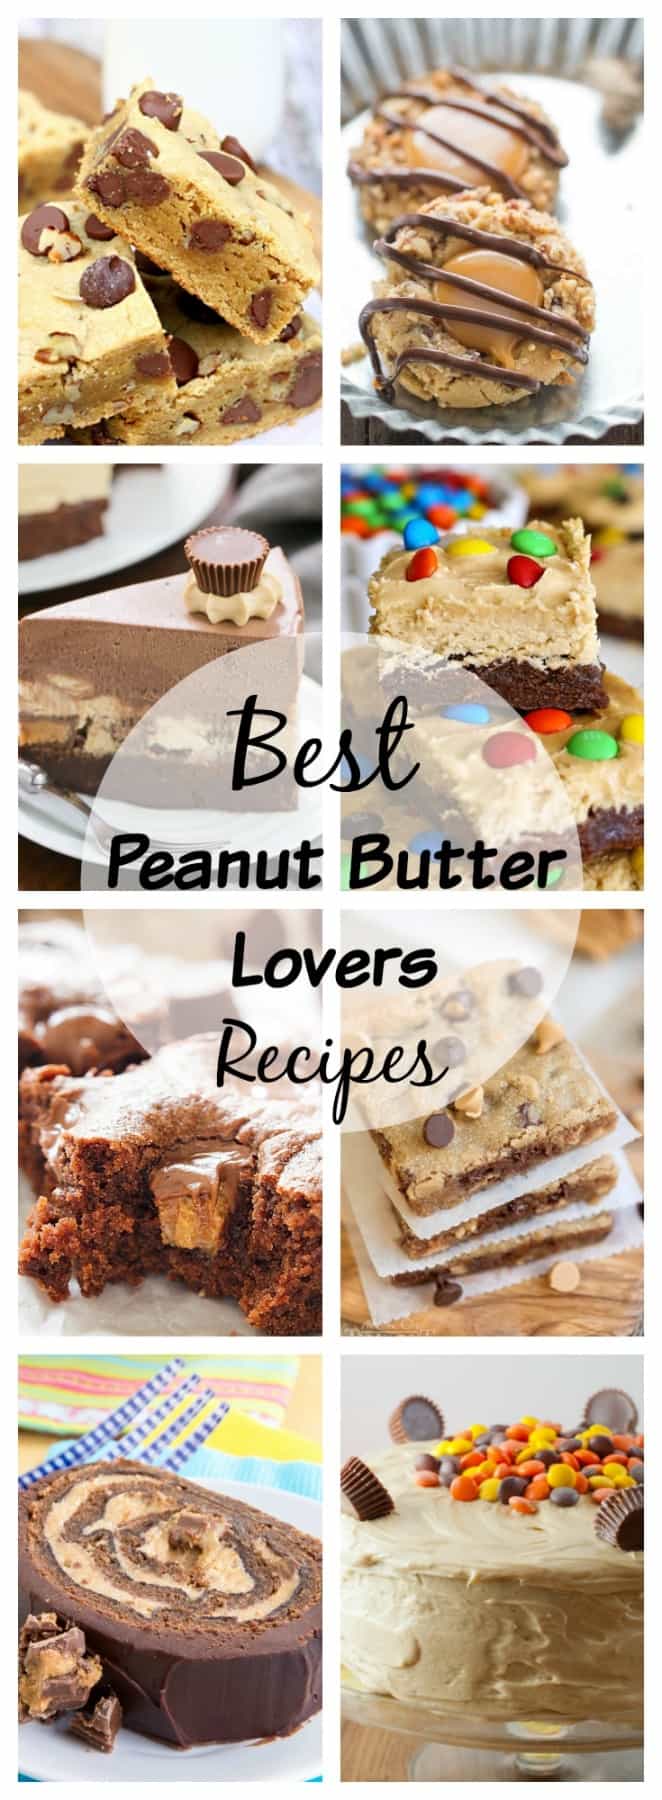 Peanut butter recipe lovers rejoice! This round up is just for you!